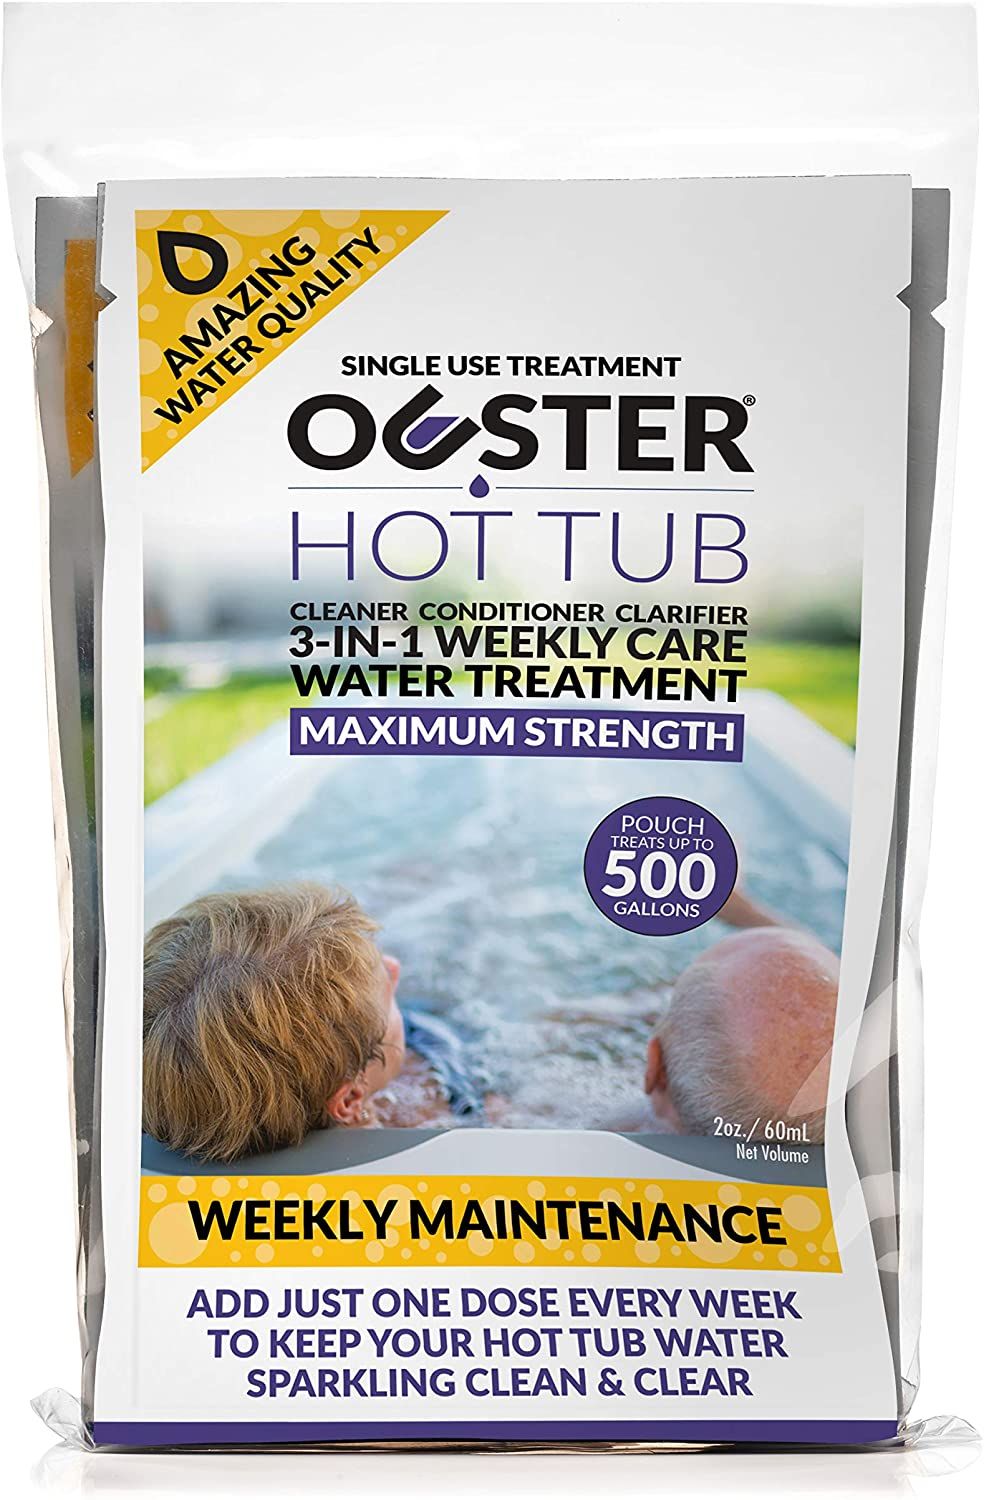 Ouster 3-in-1 Hot Tub Cleaner 